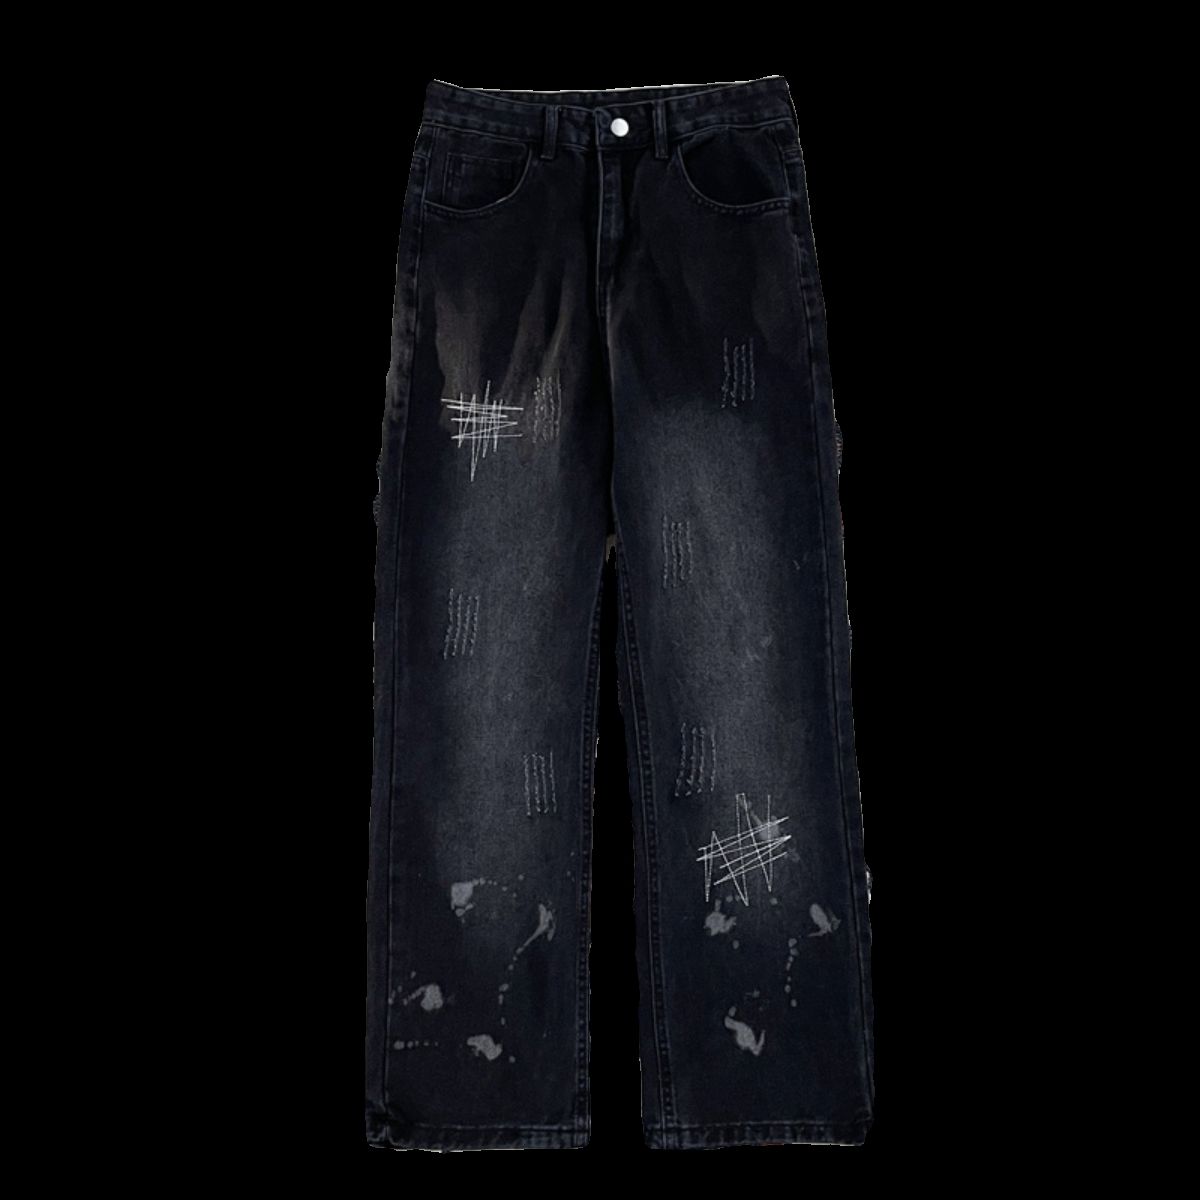 Splash-ink jacquard jeans vibe high street handsome men's trousers spring and autumn American fashion brand distressed straight trousers